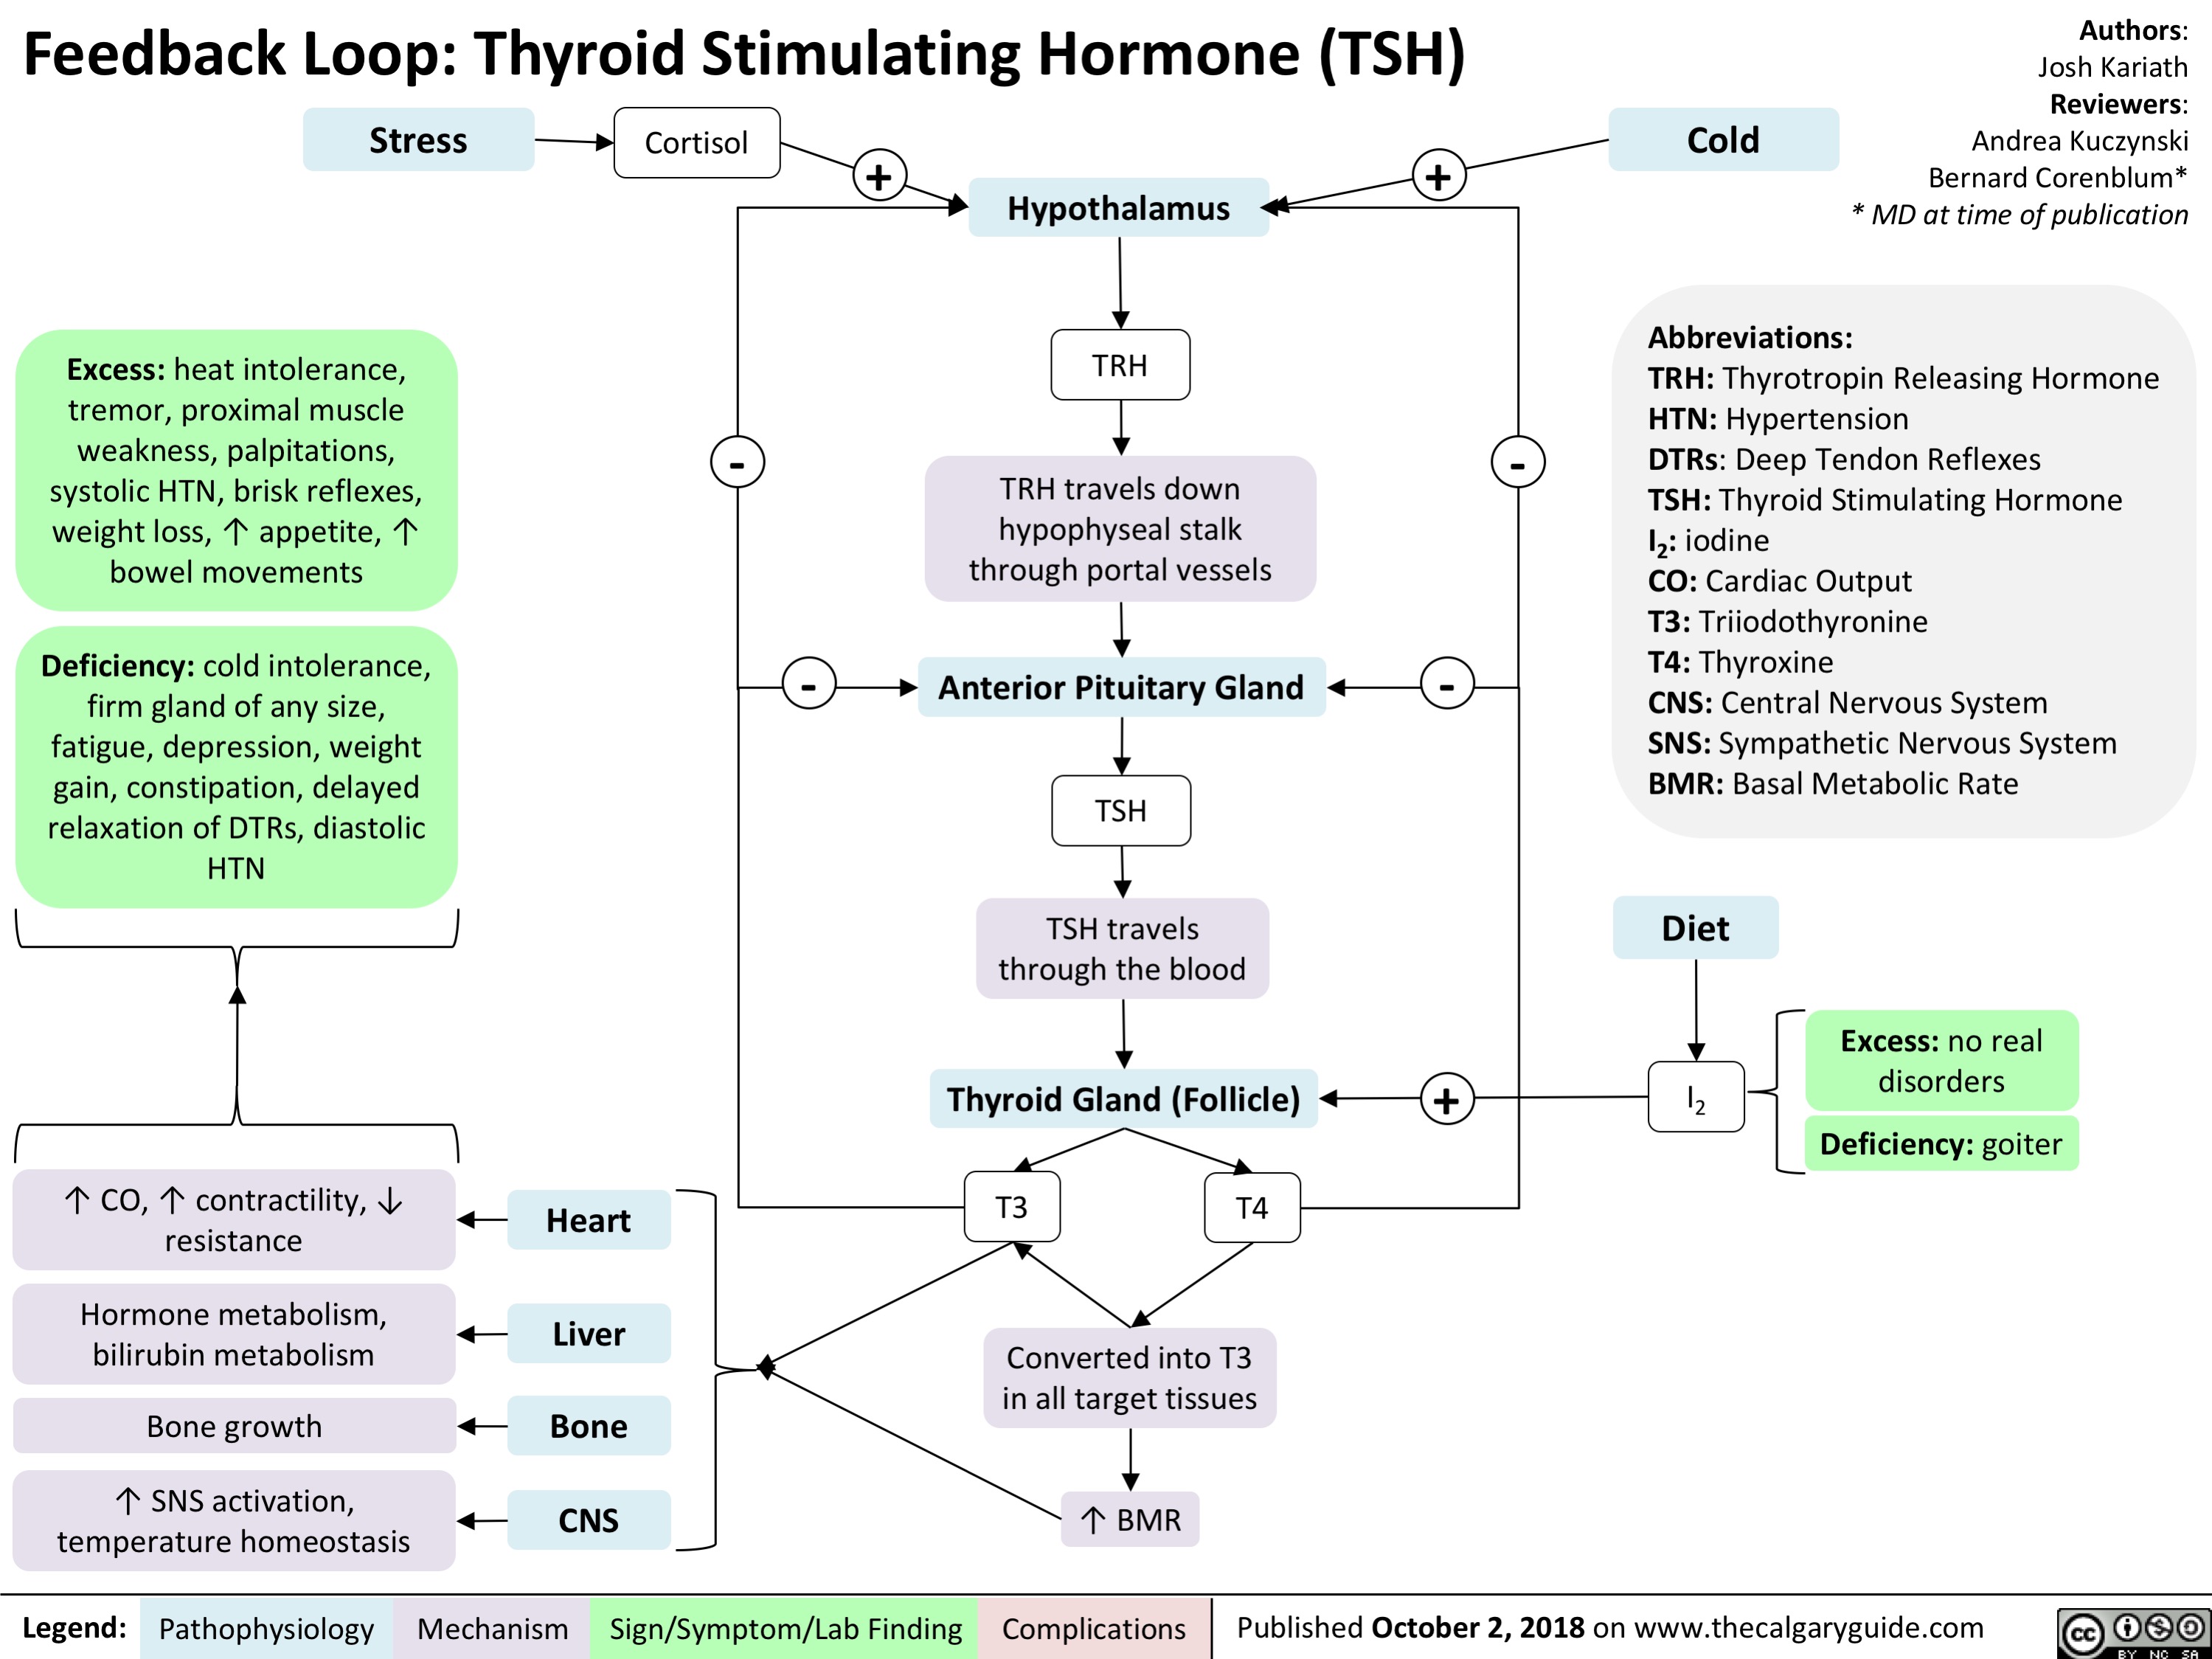 Feedback Loop: Thyroid Stimulating Hormone (TSH)
Authors: Josh Kariath Reviewers: Andrea Kuczynski Bernard Corenblum* * MD at time of publication
   Stress
Excess: heat intolerance, tremor, proximal muscle weakness, palpitations, systolic HTN, brisk reflexes, weight loss, ↑ appetite, ↑ bowel movements
Deficiency: cold intolerance, firm gland of any size, fatigue, depression, weight gain, constipation, delayed relaxation of DTRs, diastolic HTN
Cortisol
-
+ +
Cold
     Hypothalamus
      TRH
TRH travels down
hypophyseal stalk through portal vessels
Anterior Pituitary Gland -
TSH
TSH travels through the blood
Thyroid Gland (Follicle) +
T3 T4
Converted into T3 in all target tissues
↑ BMR
-
Abbreviations:
TRH: Thyrotropin Releasing Hormone HTN: Hypertension
DTRs: Deep Tendon Reflexes
TSH: Thyroid Stimulating Hormone I2: iodine
CO: Cardiac Output
T3: Triiodothyronine
T4: Thyroxine
CNS: Central Nervous System
SNS: Sympathetic Nervous System BMR: Basal Metabolic Rate
      -
        Diet
I2
Excess: no real disorders
Deficiency: goiter
              ↑ CO, ↑ contractility, ↓ resistance
Hormone metabolism, bilirubin metabolism
Heart Liver
          Bone growth       Bone
  ↑ SNS activation, temperature homeostasis
CNS
    Legend:
 Pathophysiology
 Mechanism
Sign/Symptom/Lab Finding
  Complications
Published October 2, 2018 on www.thecalgaryguide.com
   